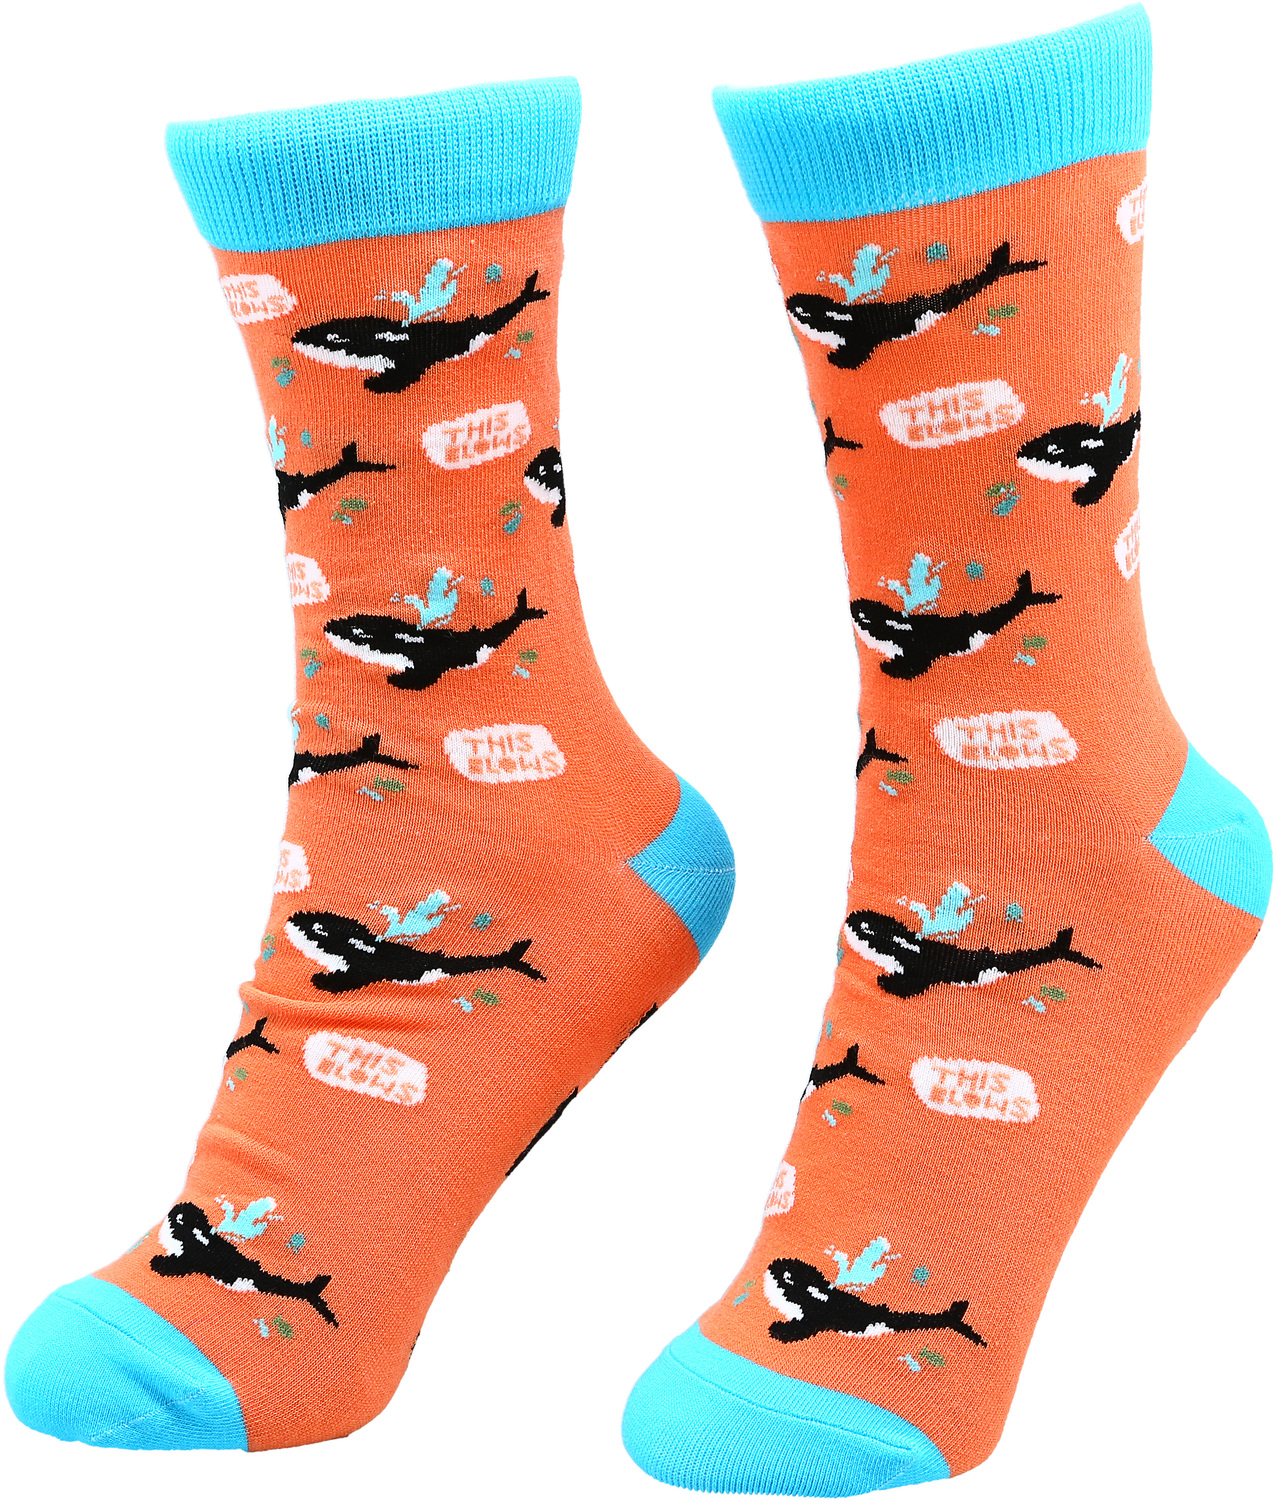 Mornings by Fugly Friends - Mornings - S/M Unisex Cotton Blend Sock